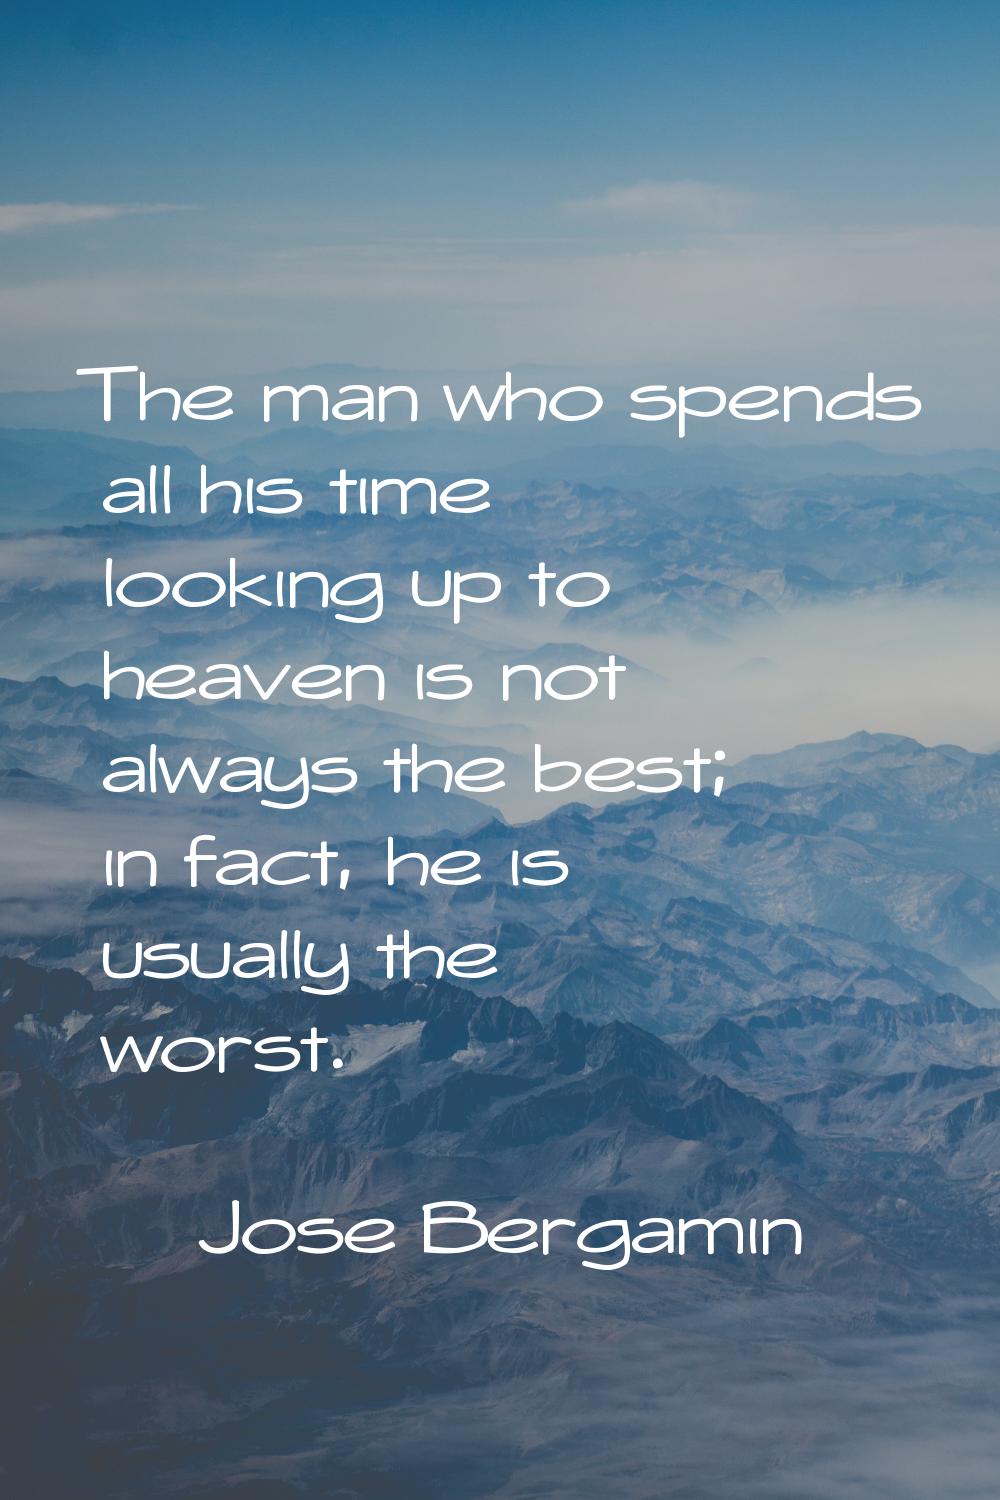 The man who spends all his time looking up to heaven is not always the best; in fact, he is usually